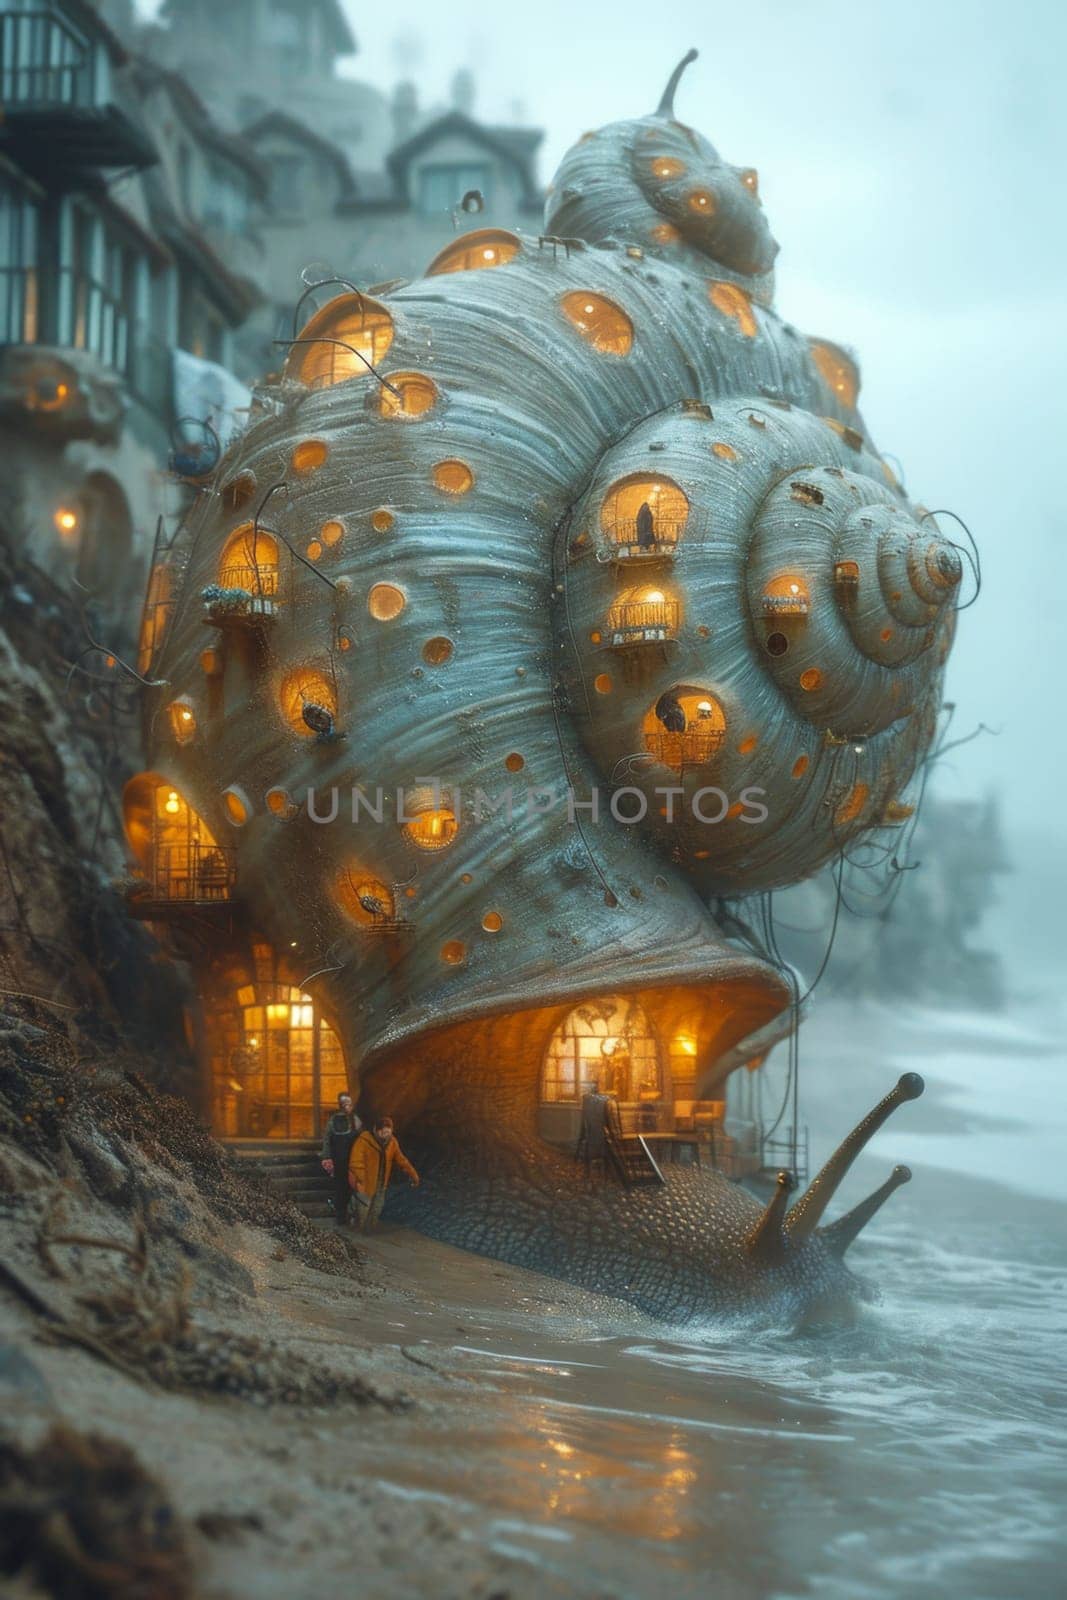 Magic Snail with a lot of little houses by Lobachad